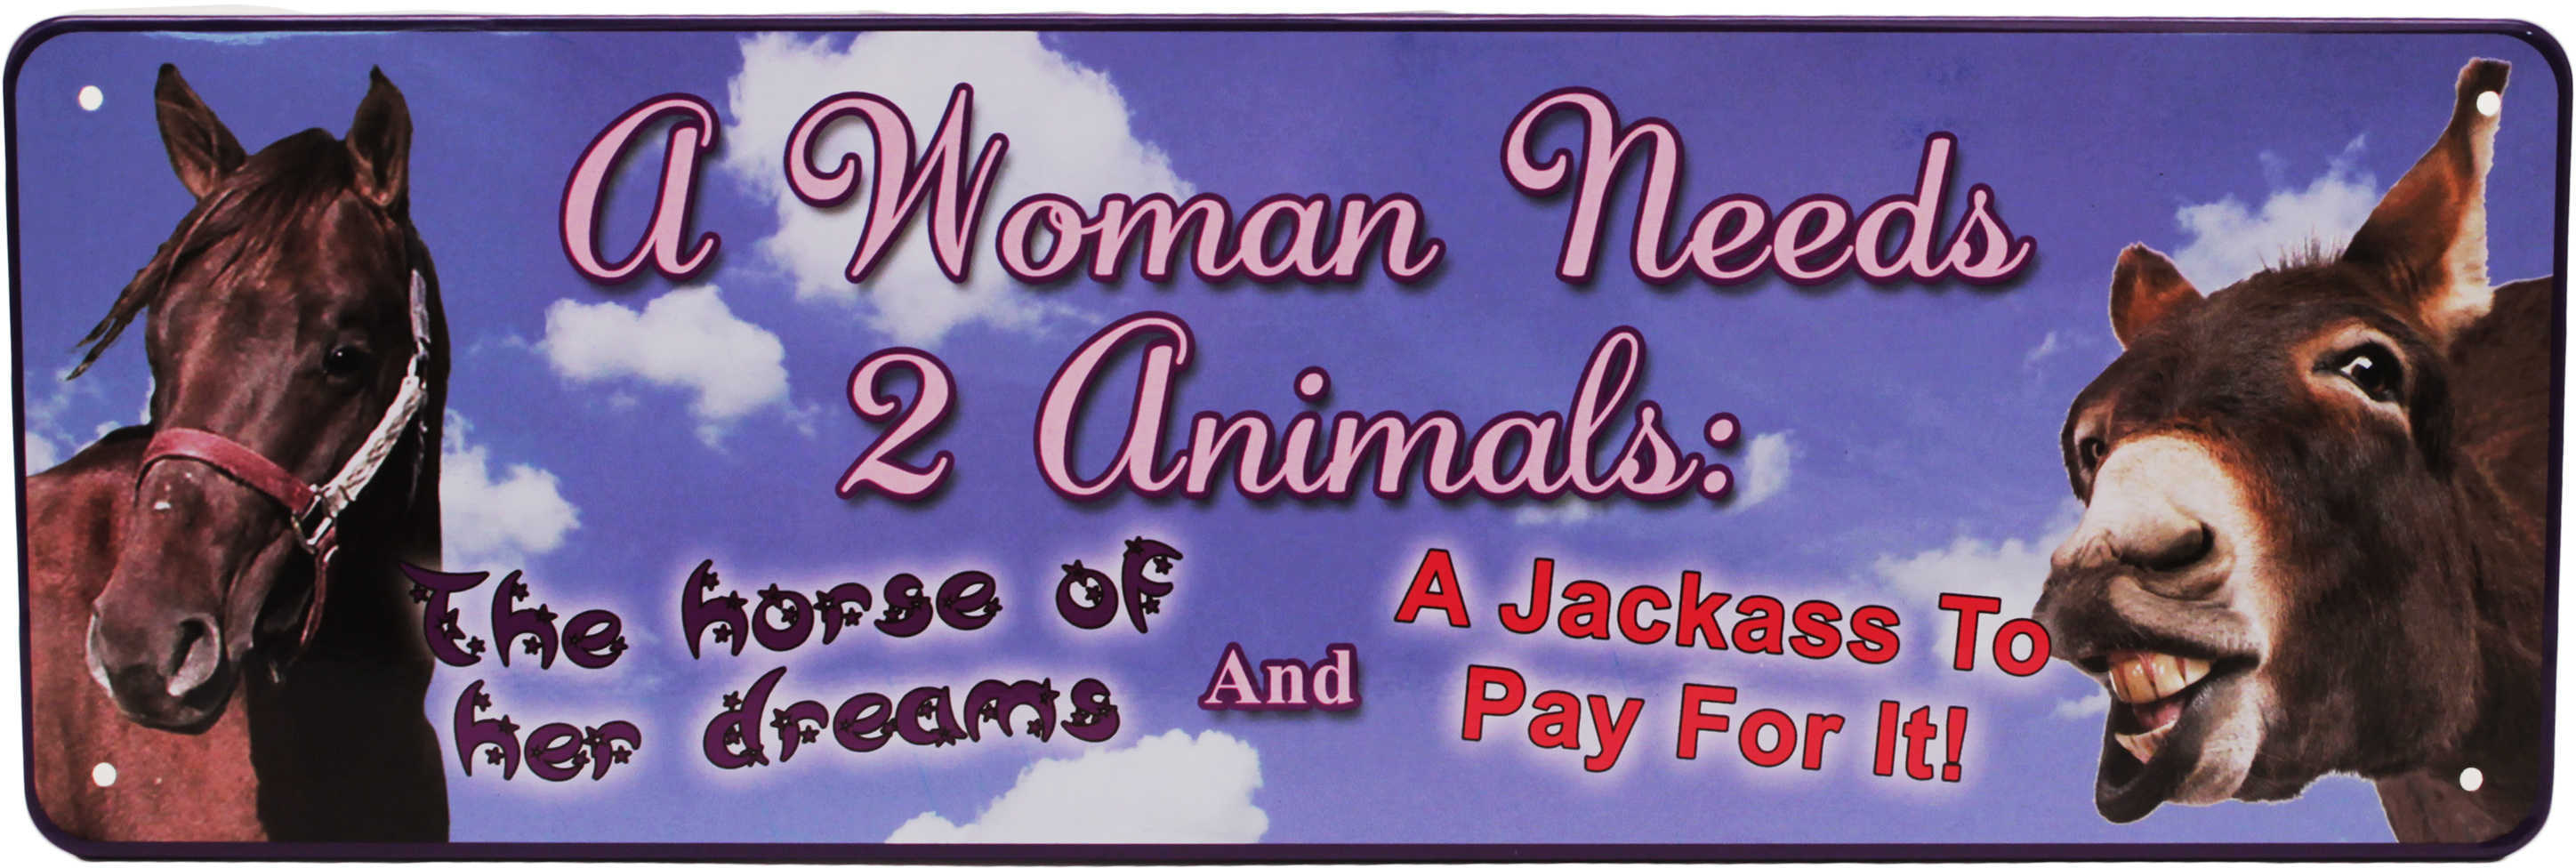 Rivers Edge Products 10.5" x 3.5" Tin Sign A Woman Nees 2 Animals 1431